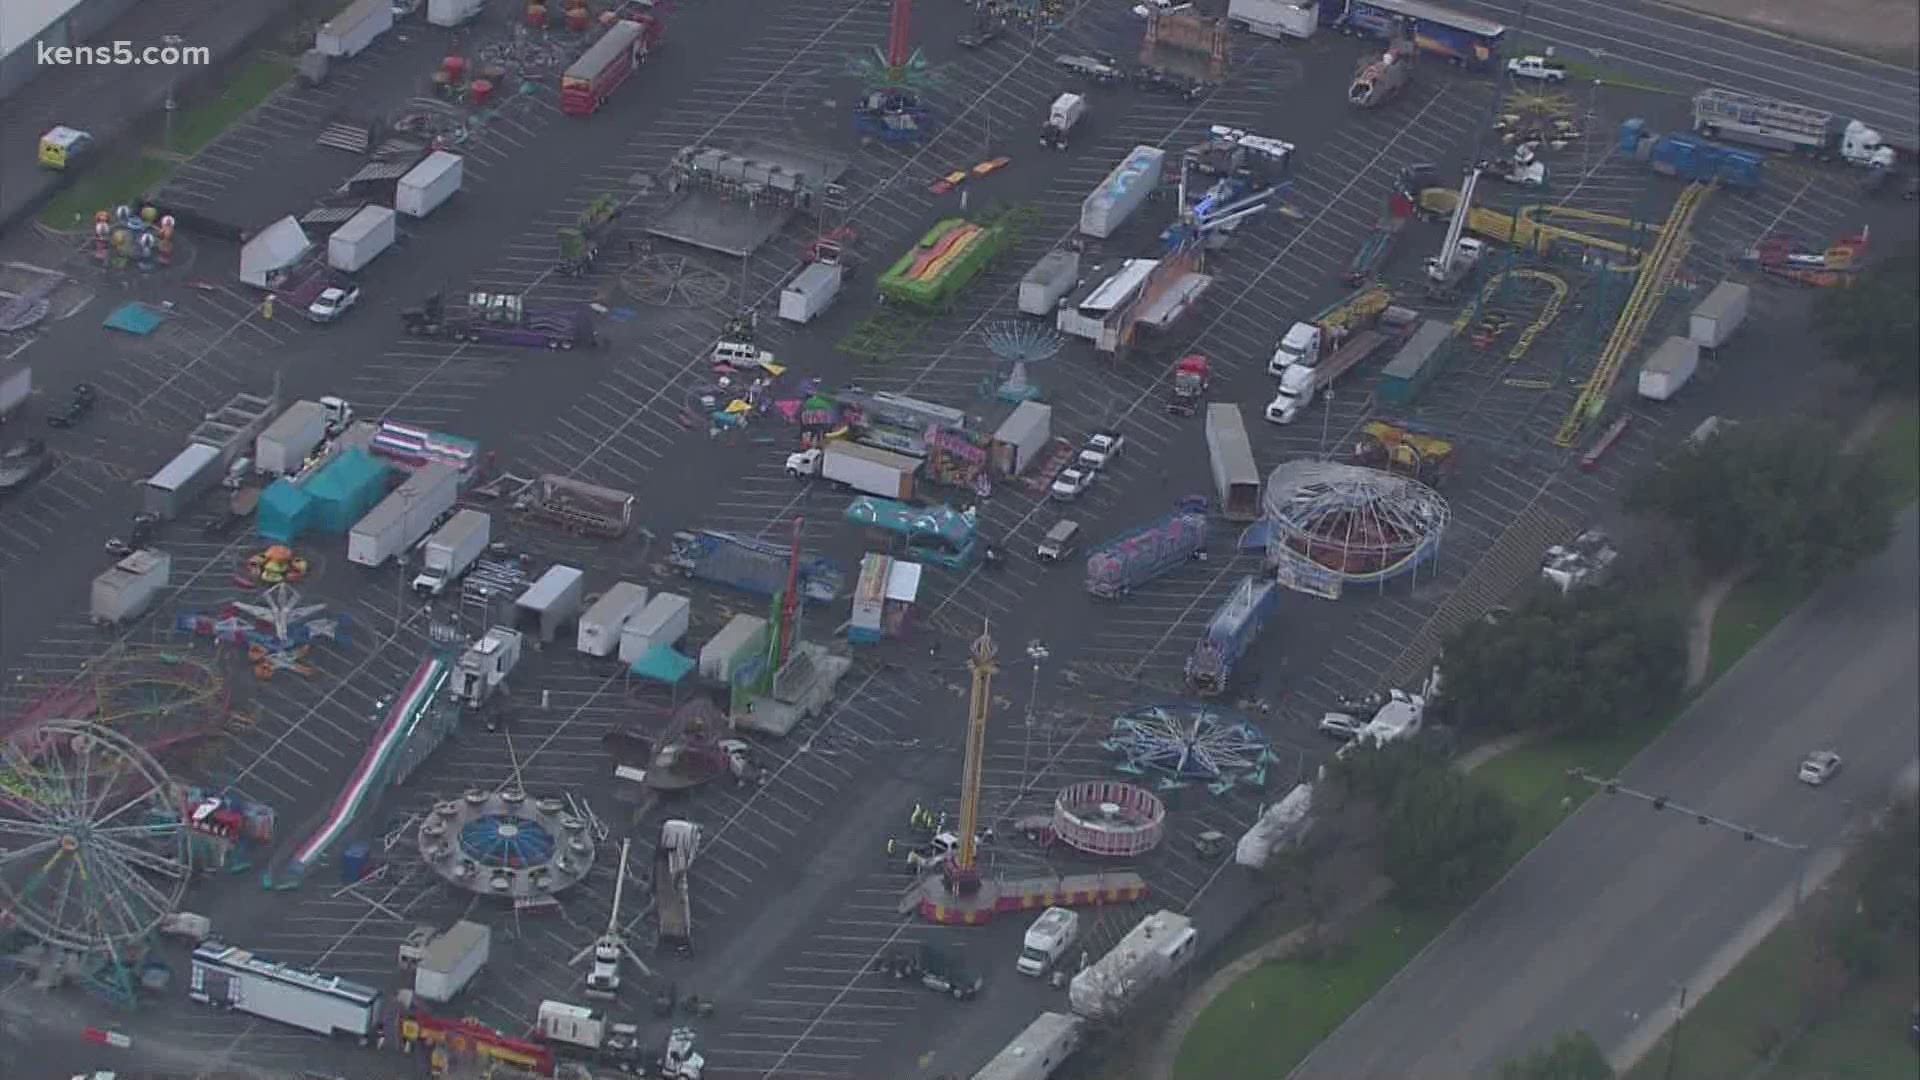 Event organizers say they're canceling the carnival, citing health and safety concerns as the pandemic continues.